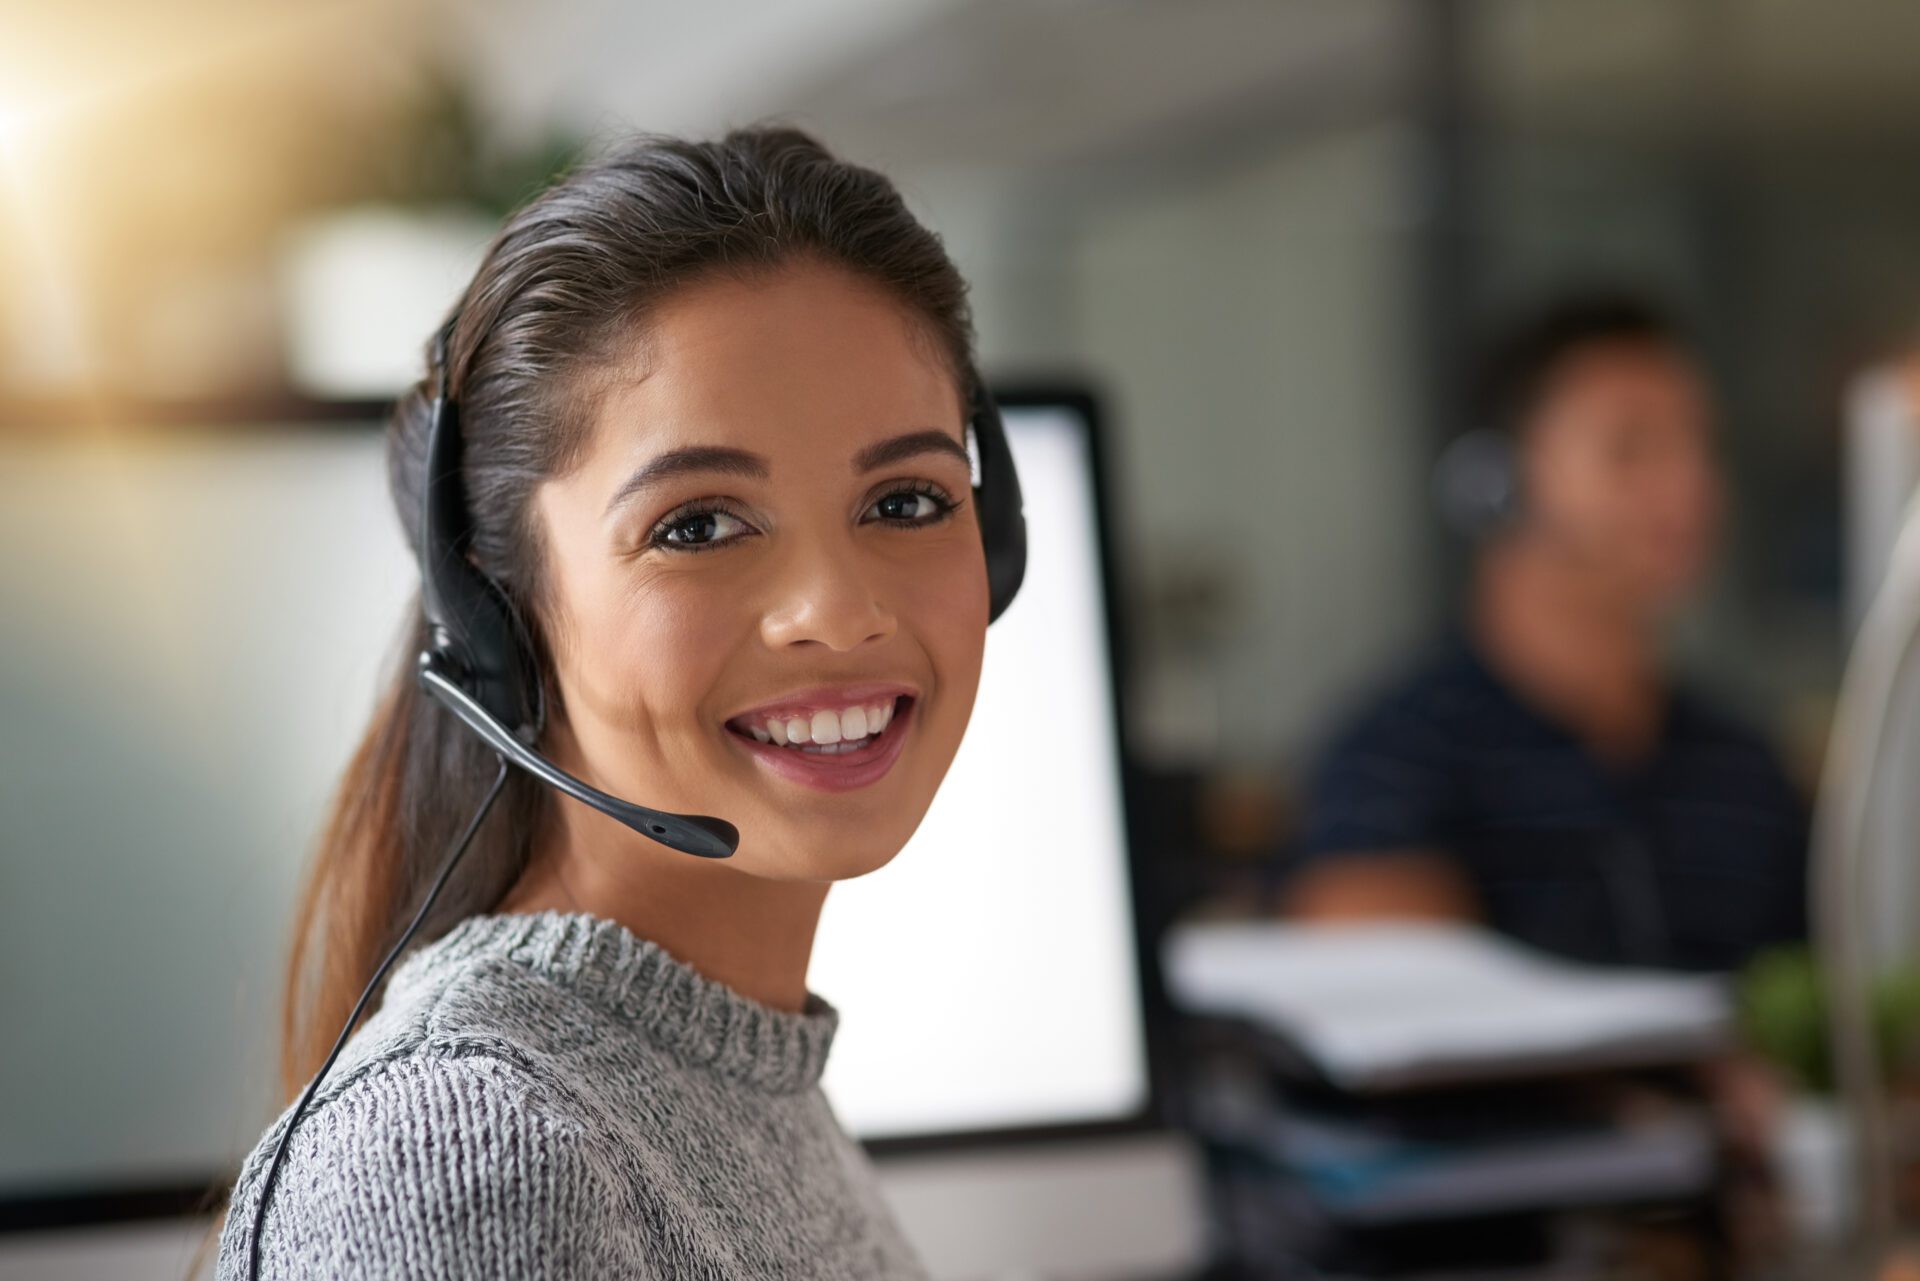 Kanekt 365's agents only take calls for one restaurant, so they are Brand Experts. A dedicated workforce guarantees an improved Customer Experience, an Increase in Repeat Sales & Reduced in-store Labor Costs!